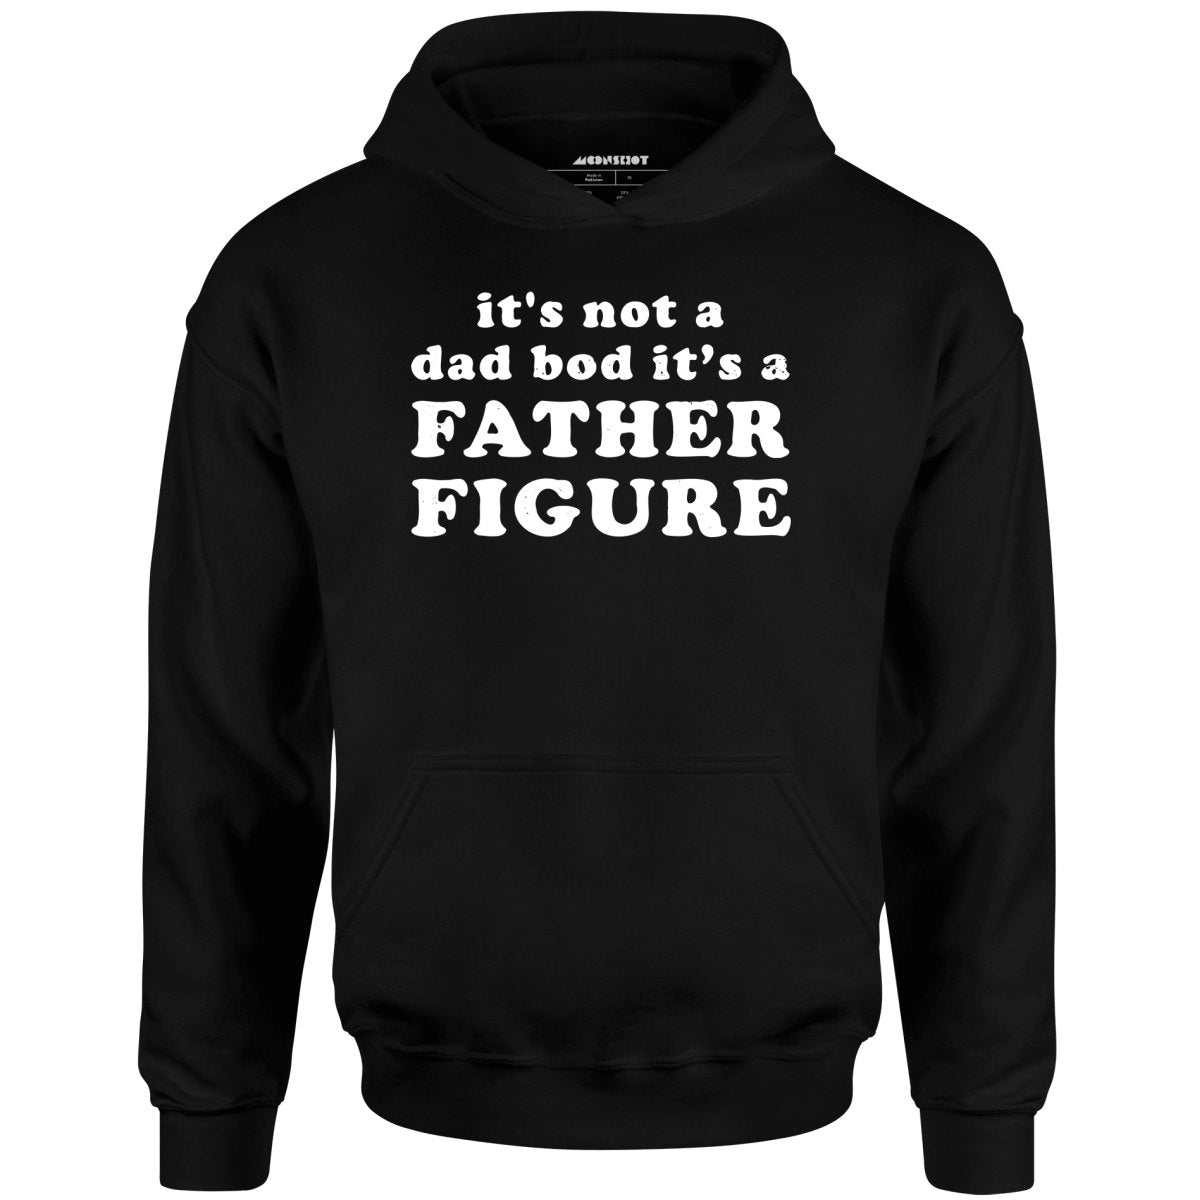 It's Not a Dad Bod It's a Father Figure - Unisex Hoodie